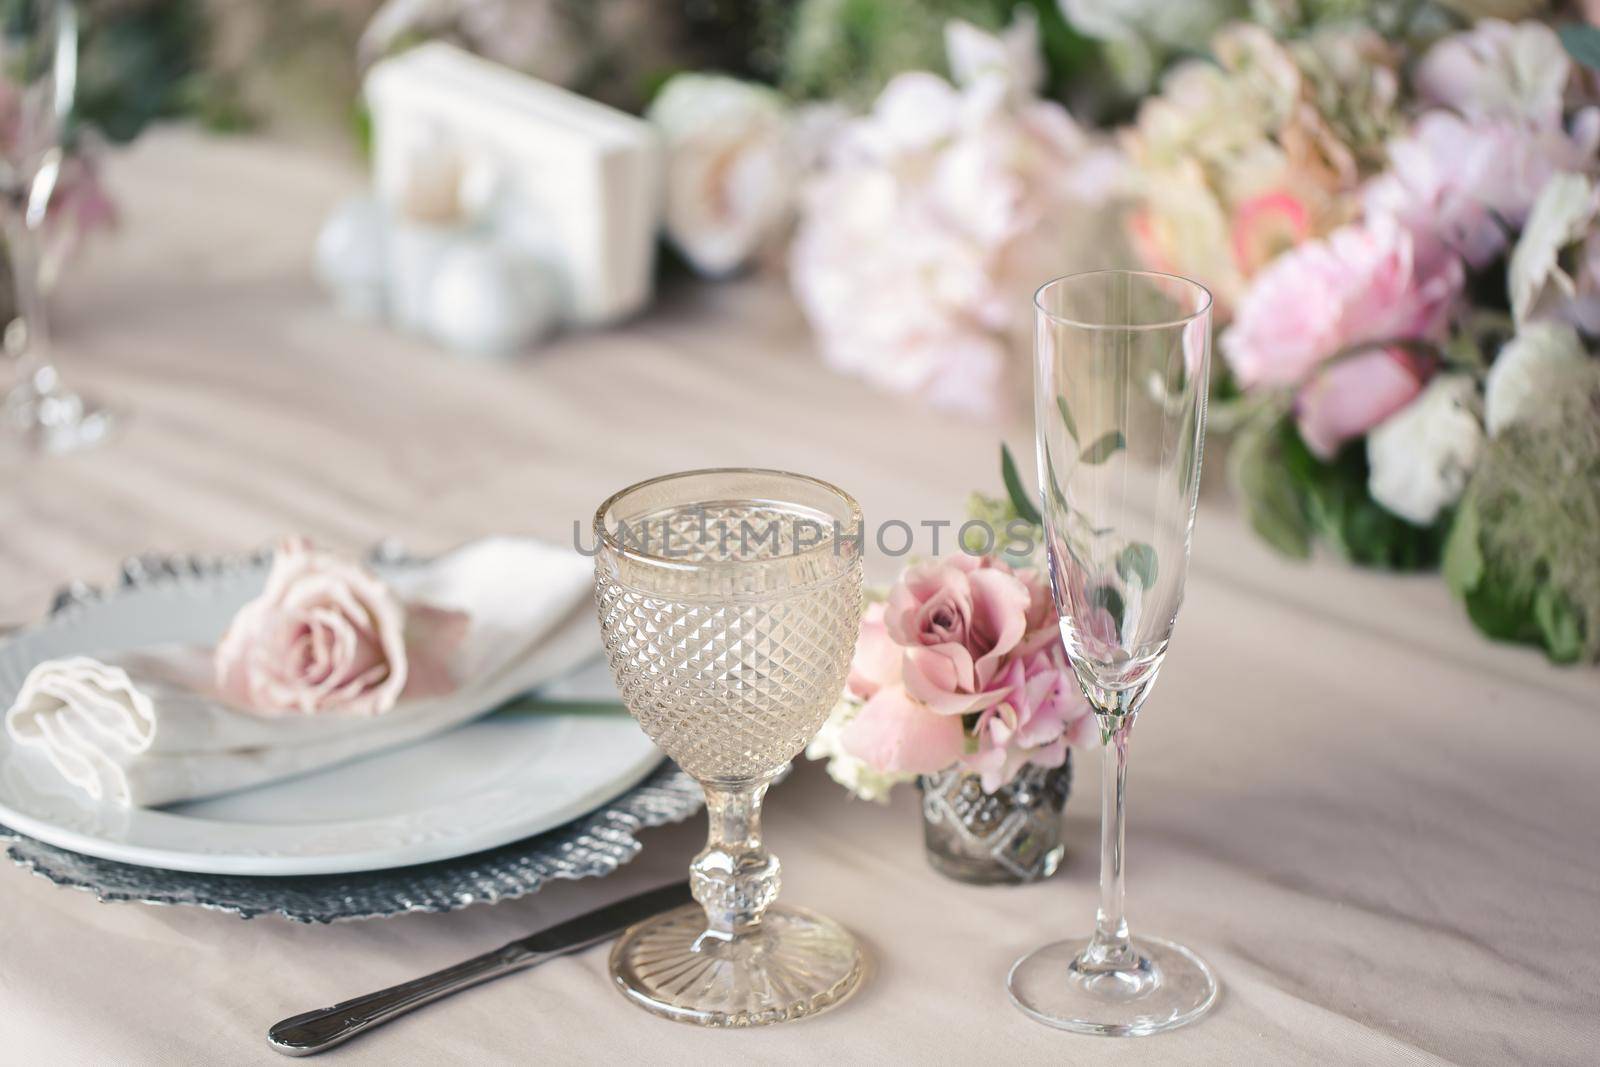 Delicate wedding table setting. A plate with a napkin and a rose by StudioPeace